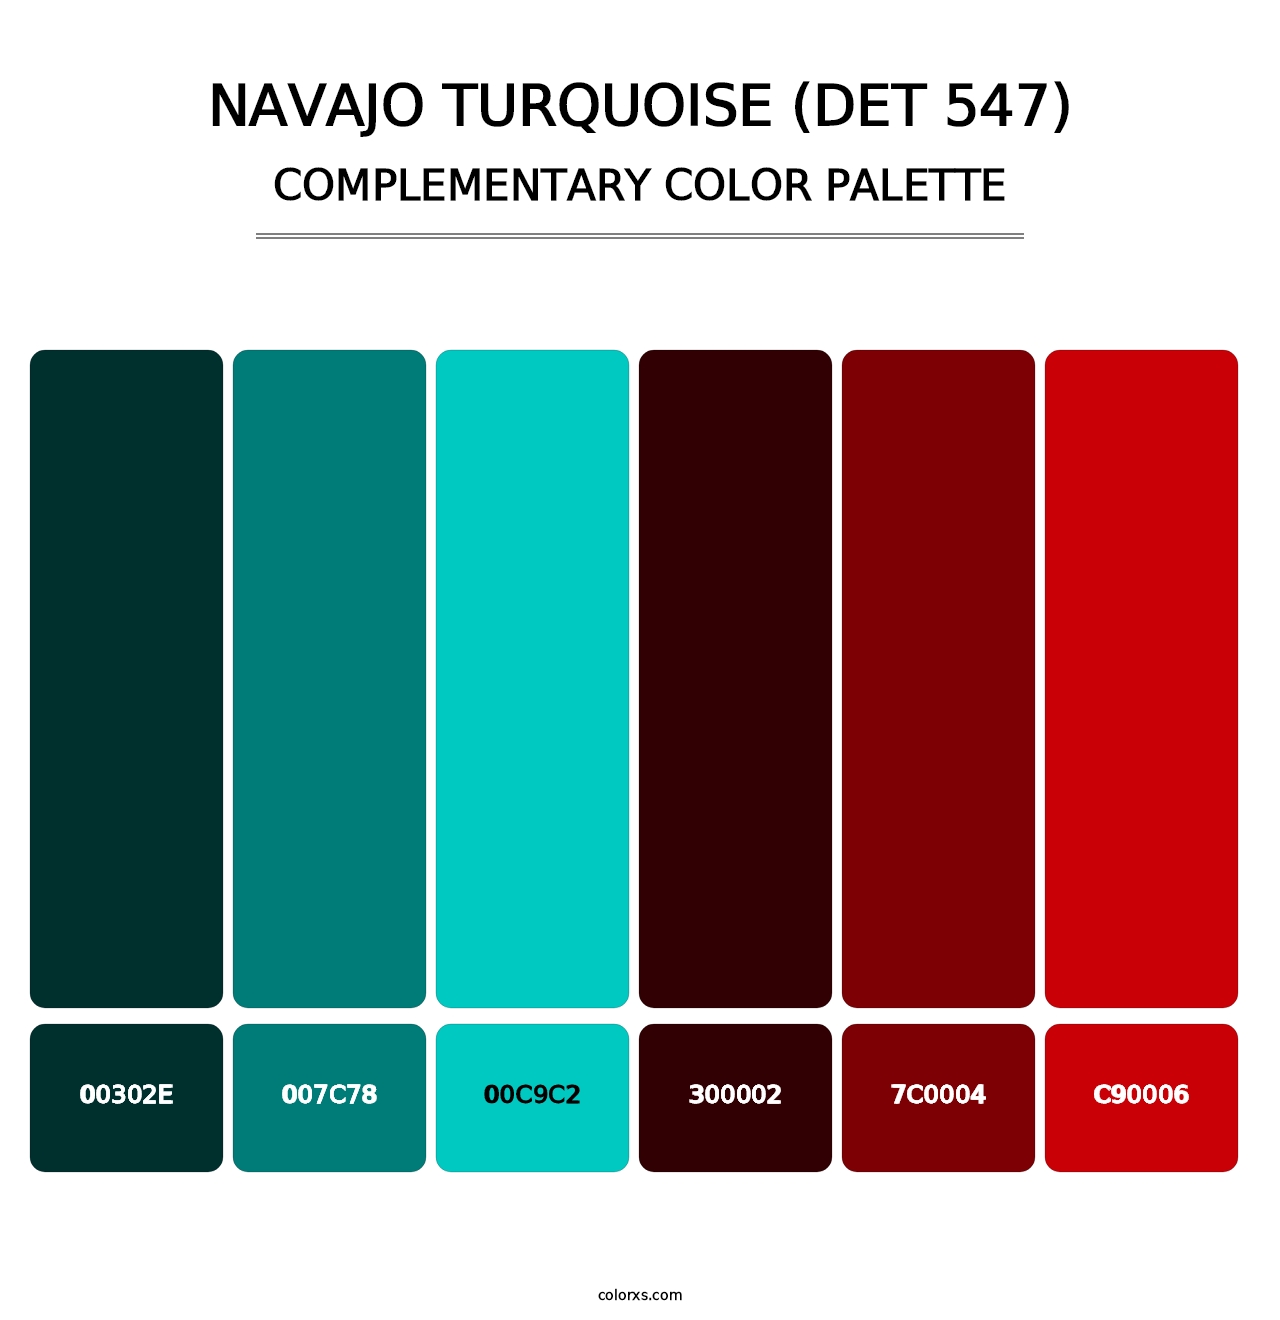 Navajo Turquoise (DET 547) - Complementary Color Palette